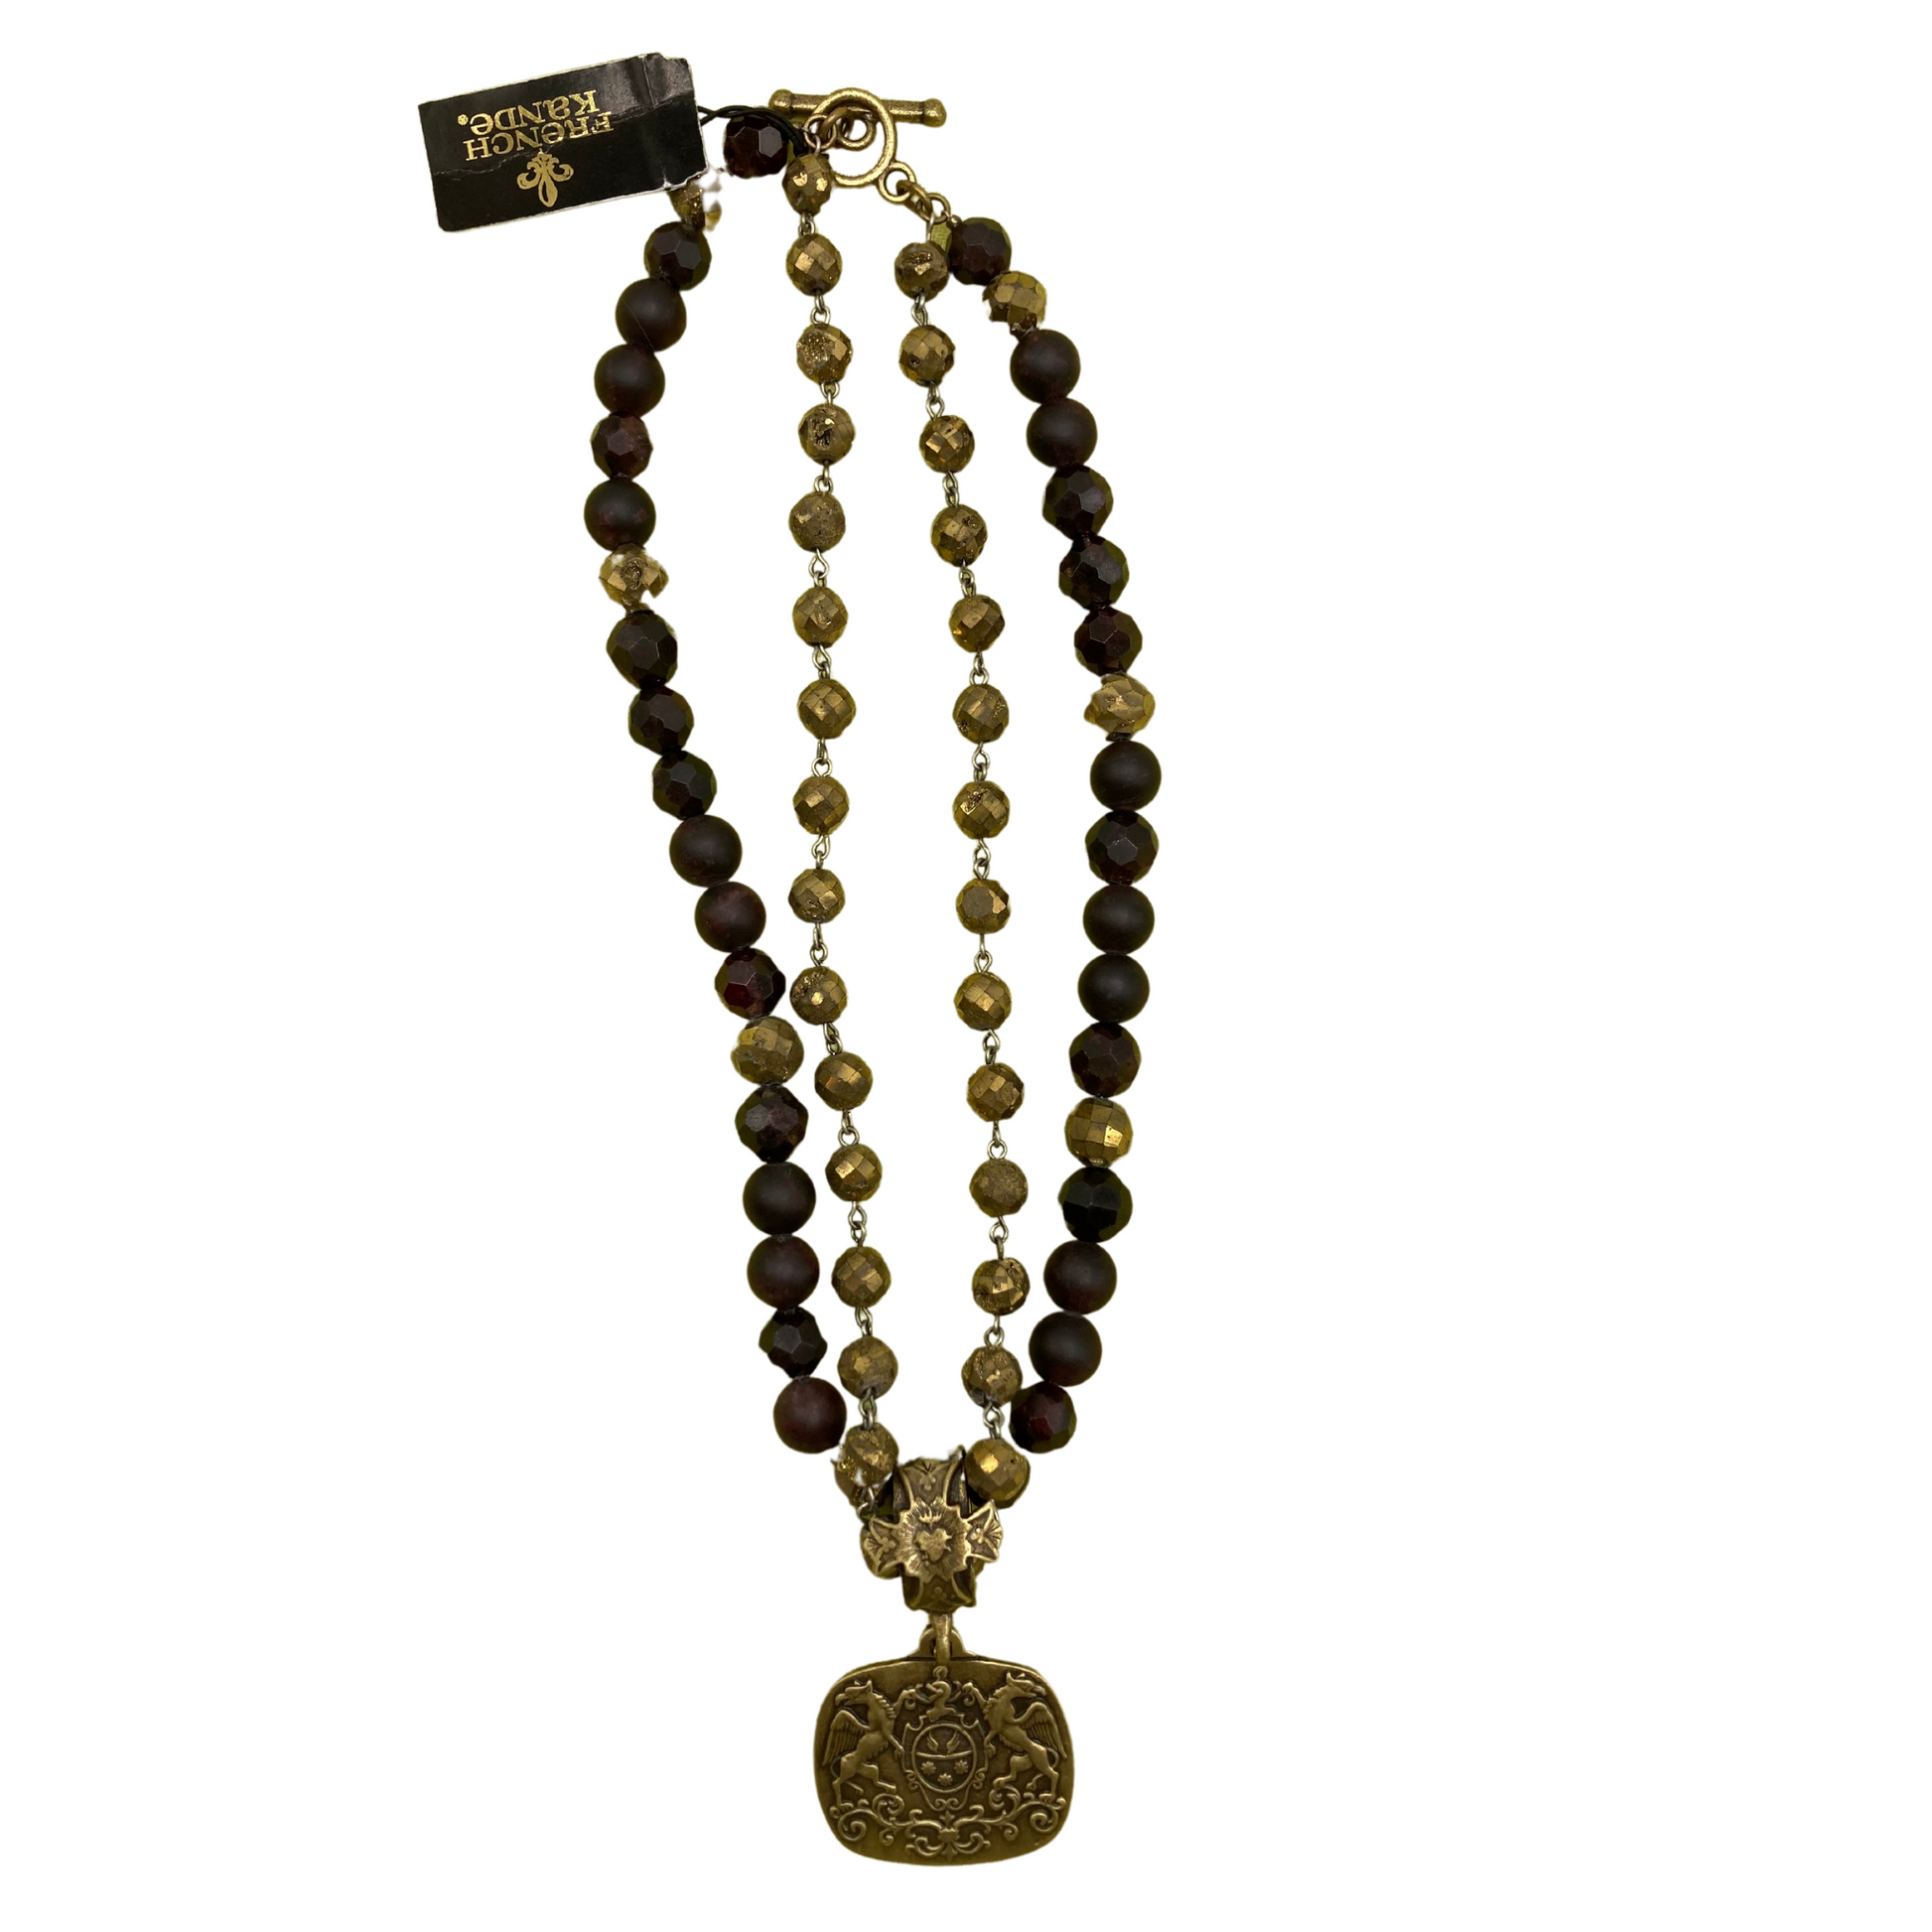 A double strand, beaded necklace with a gold medallion.